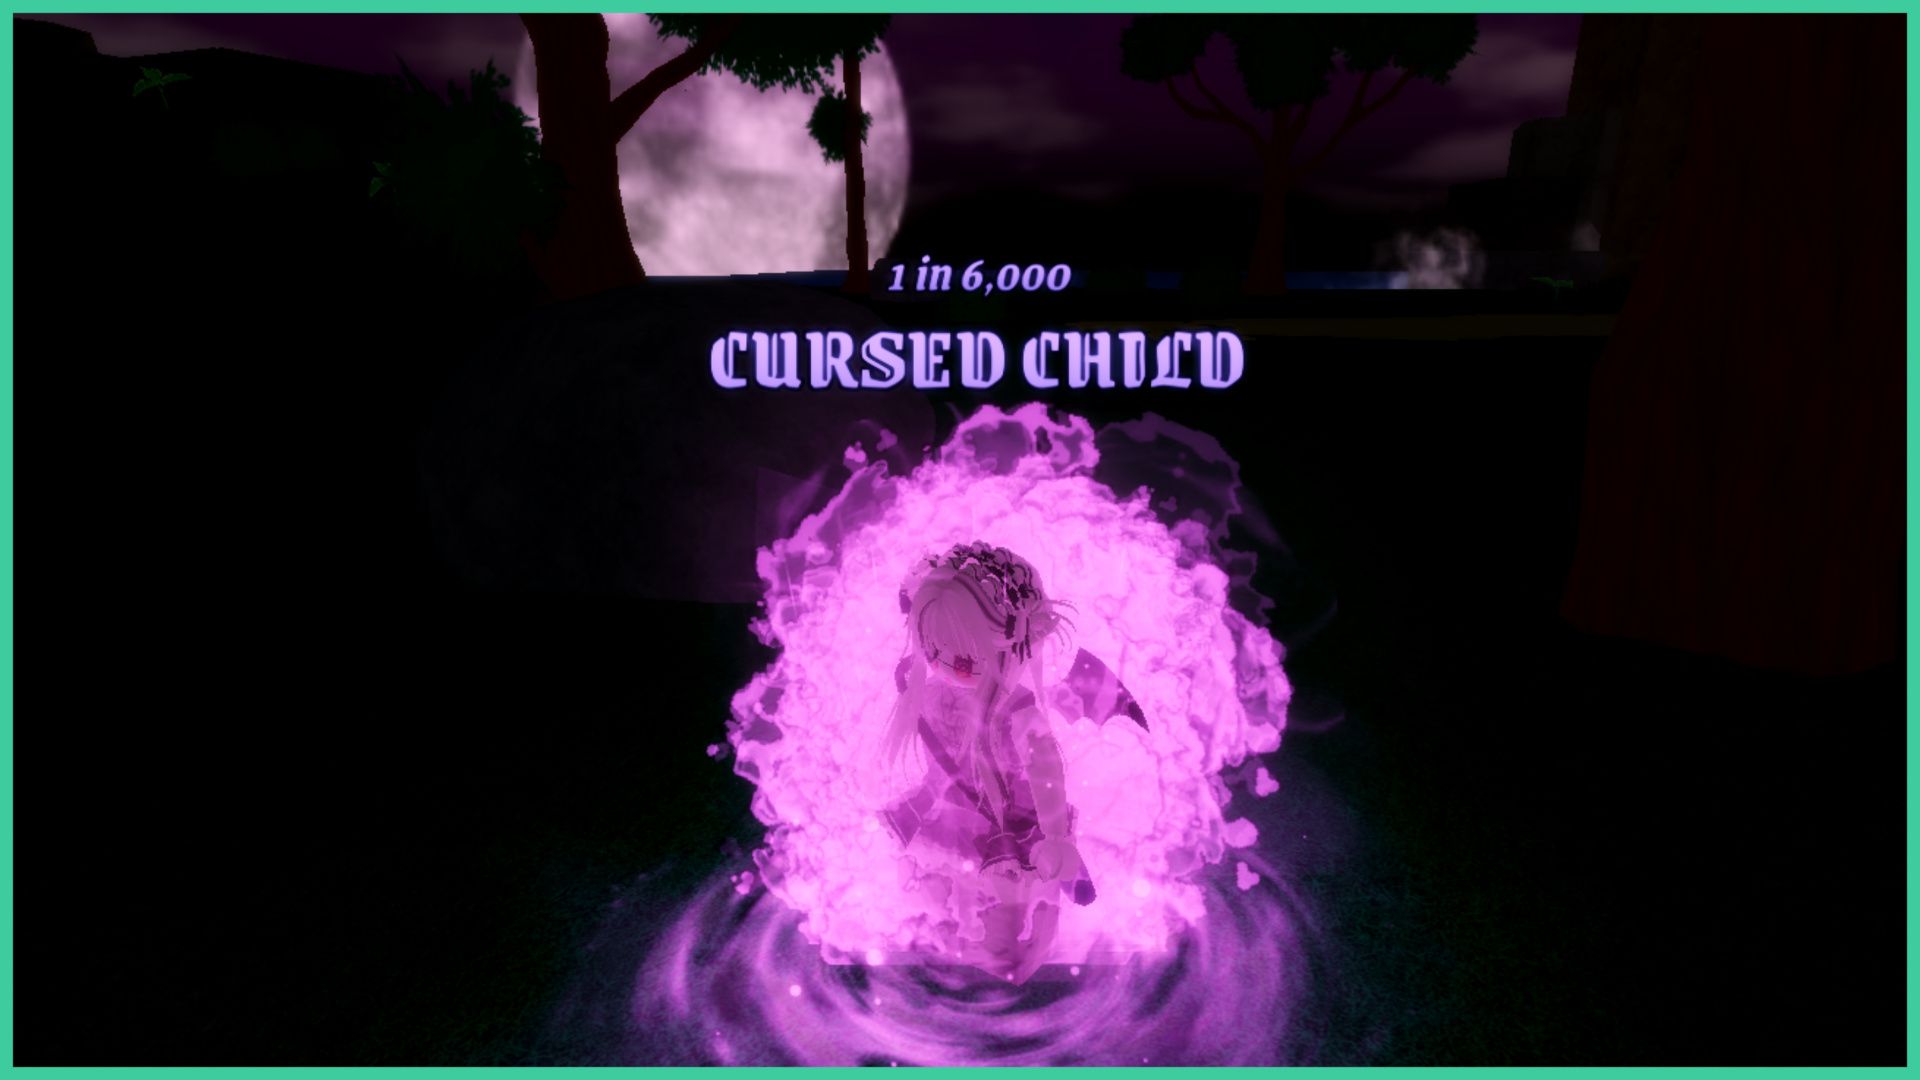 feature image for our anime roulette events guide, the image is a screenshot of a roblox player with a pink mist around them as they equip the cursed child aura, with the moon rising in the dark sky behind the trees